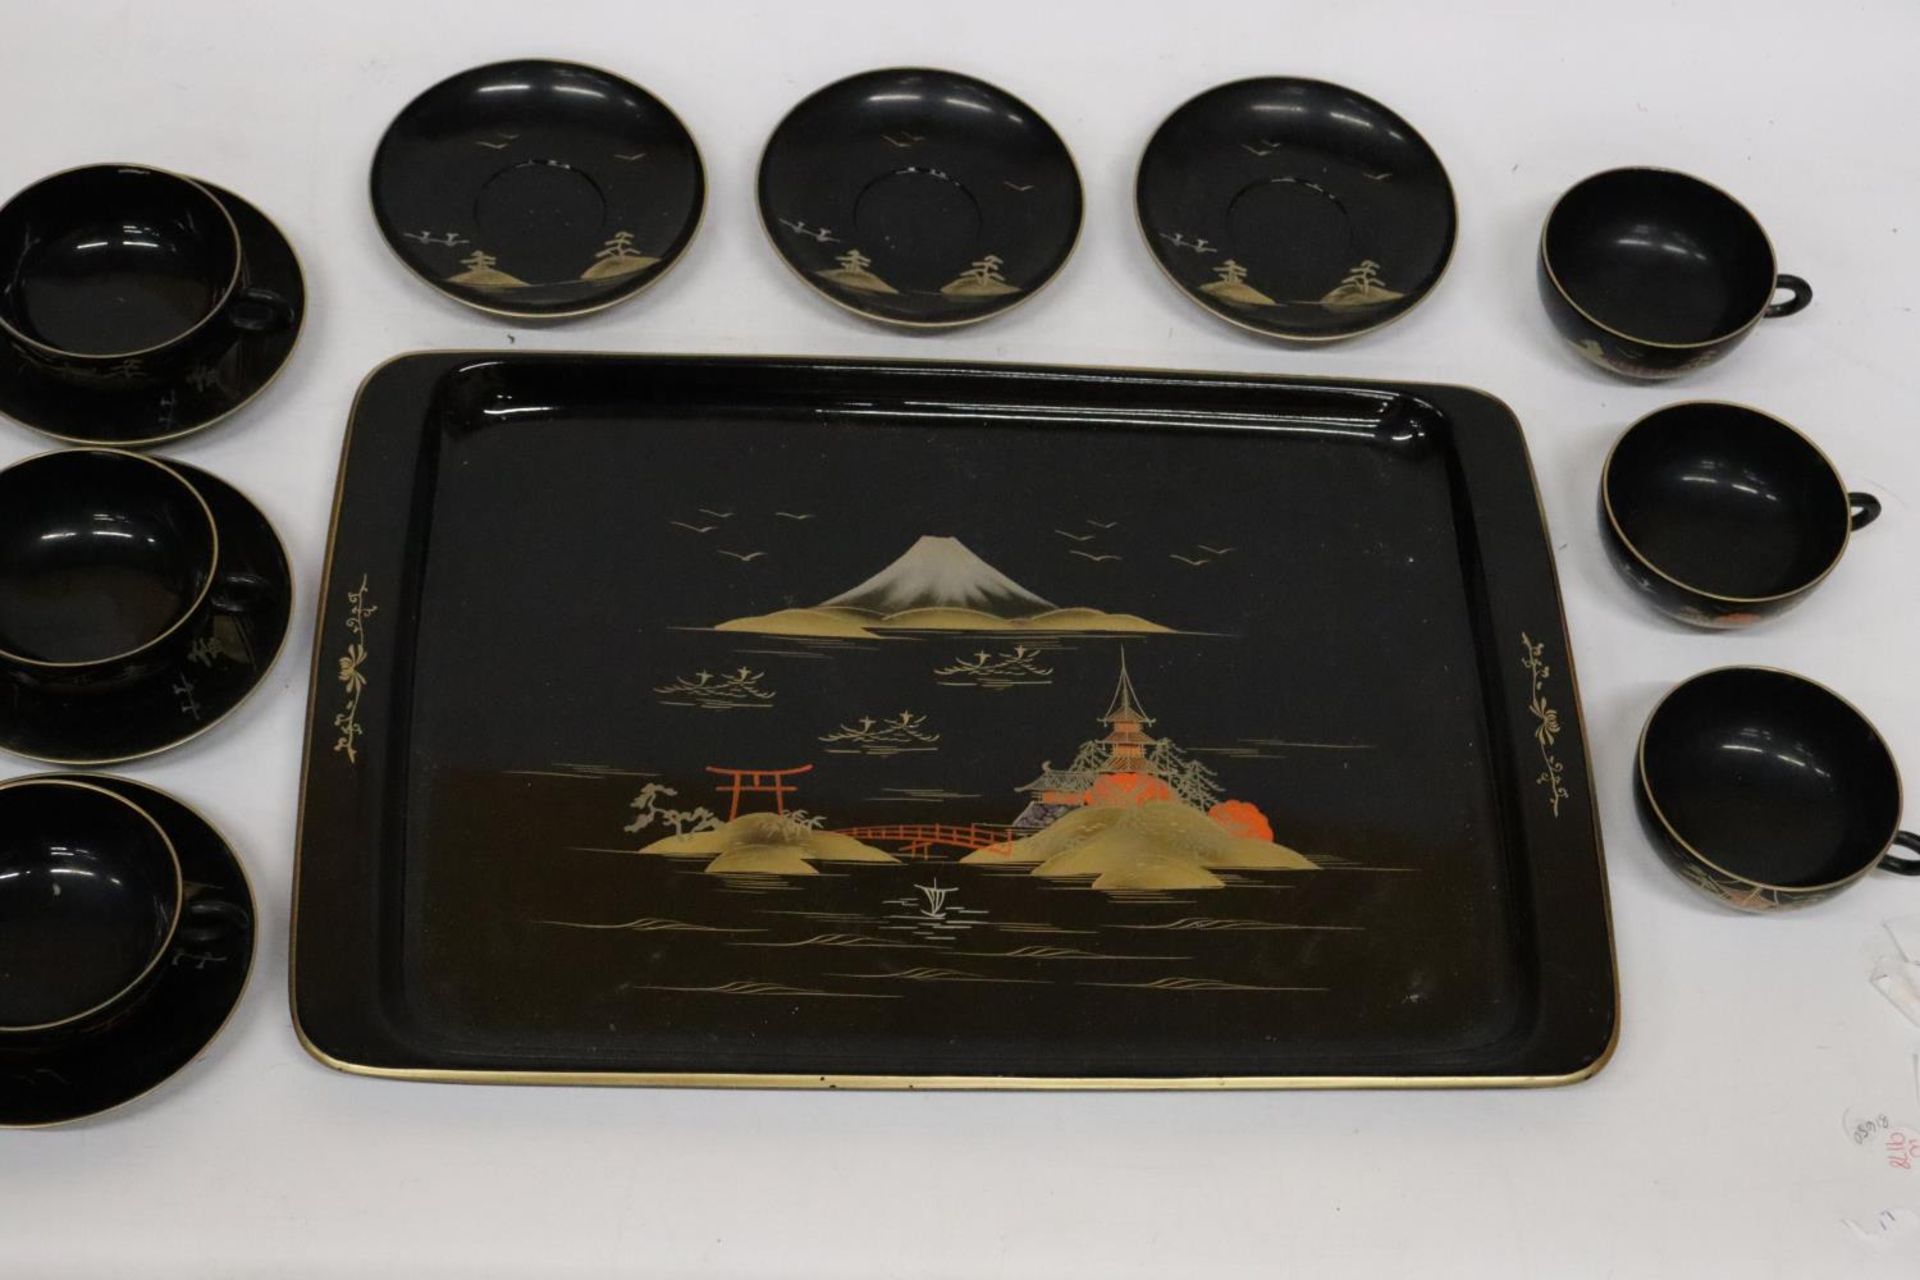 AN ORIENTAL HANDPAINTED, LACQUERED TRAY WITH SIX CUPS AND SAUCERS - Image 5 of 5